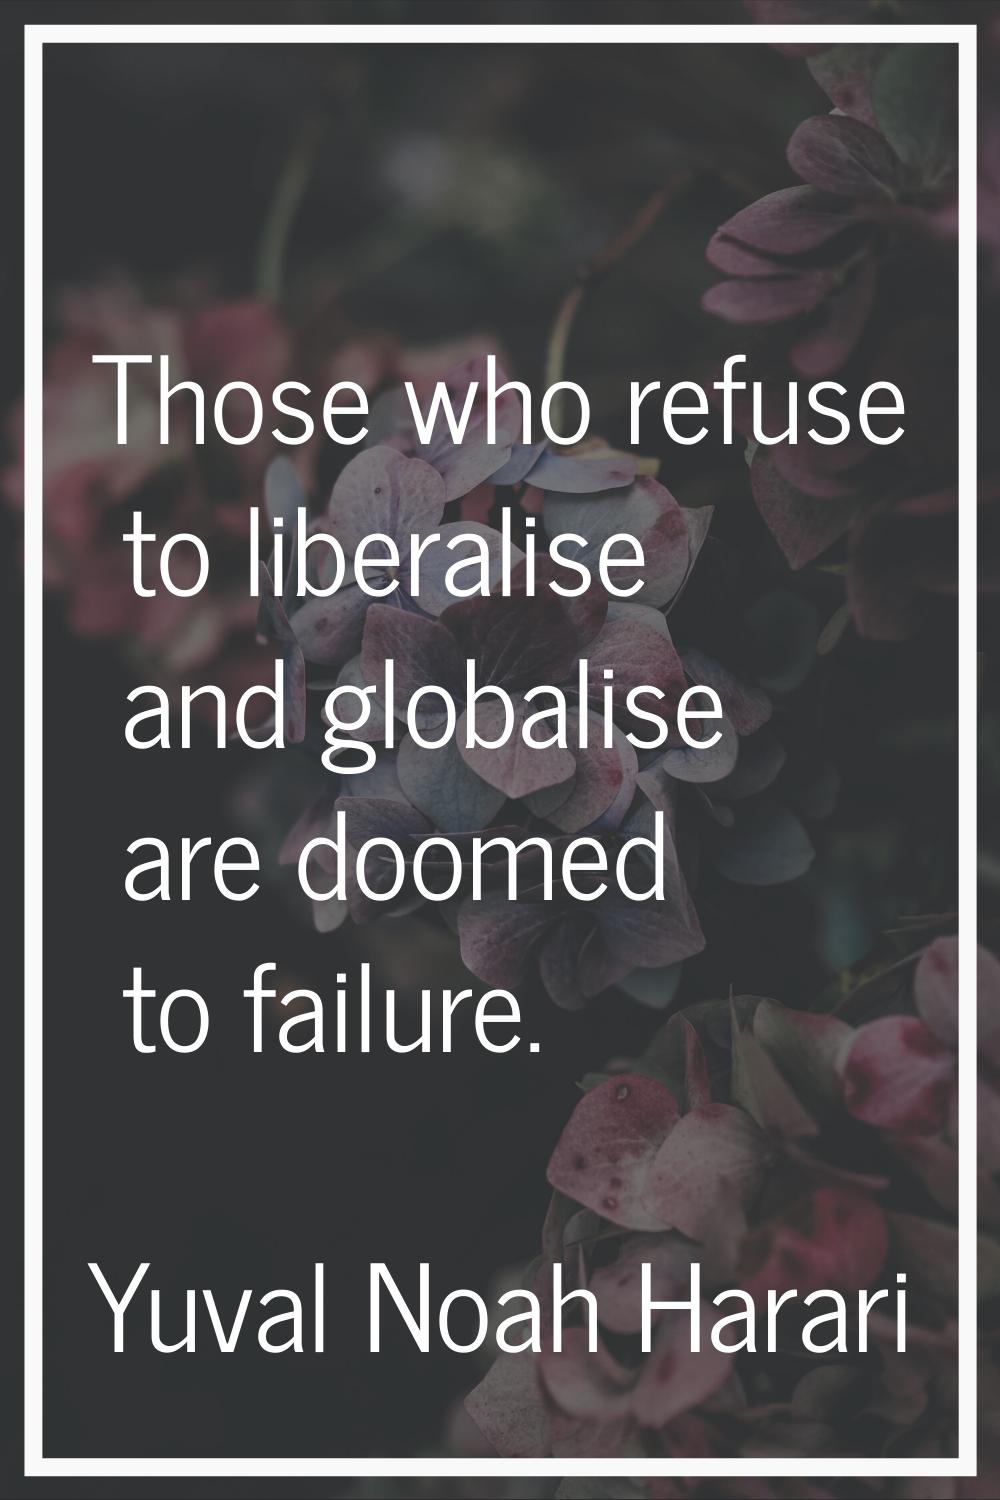 Those who refuse to liberalise and globalise are doomed to failure.